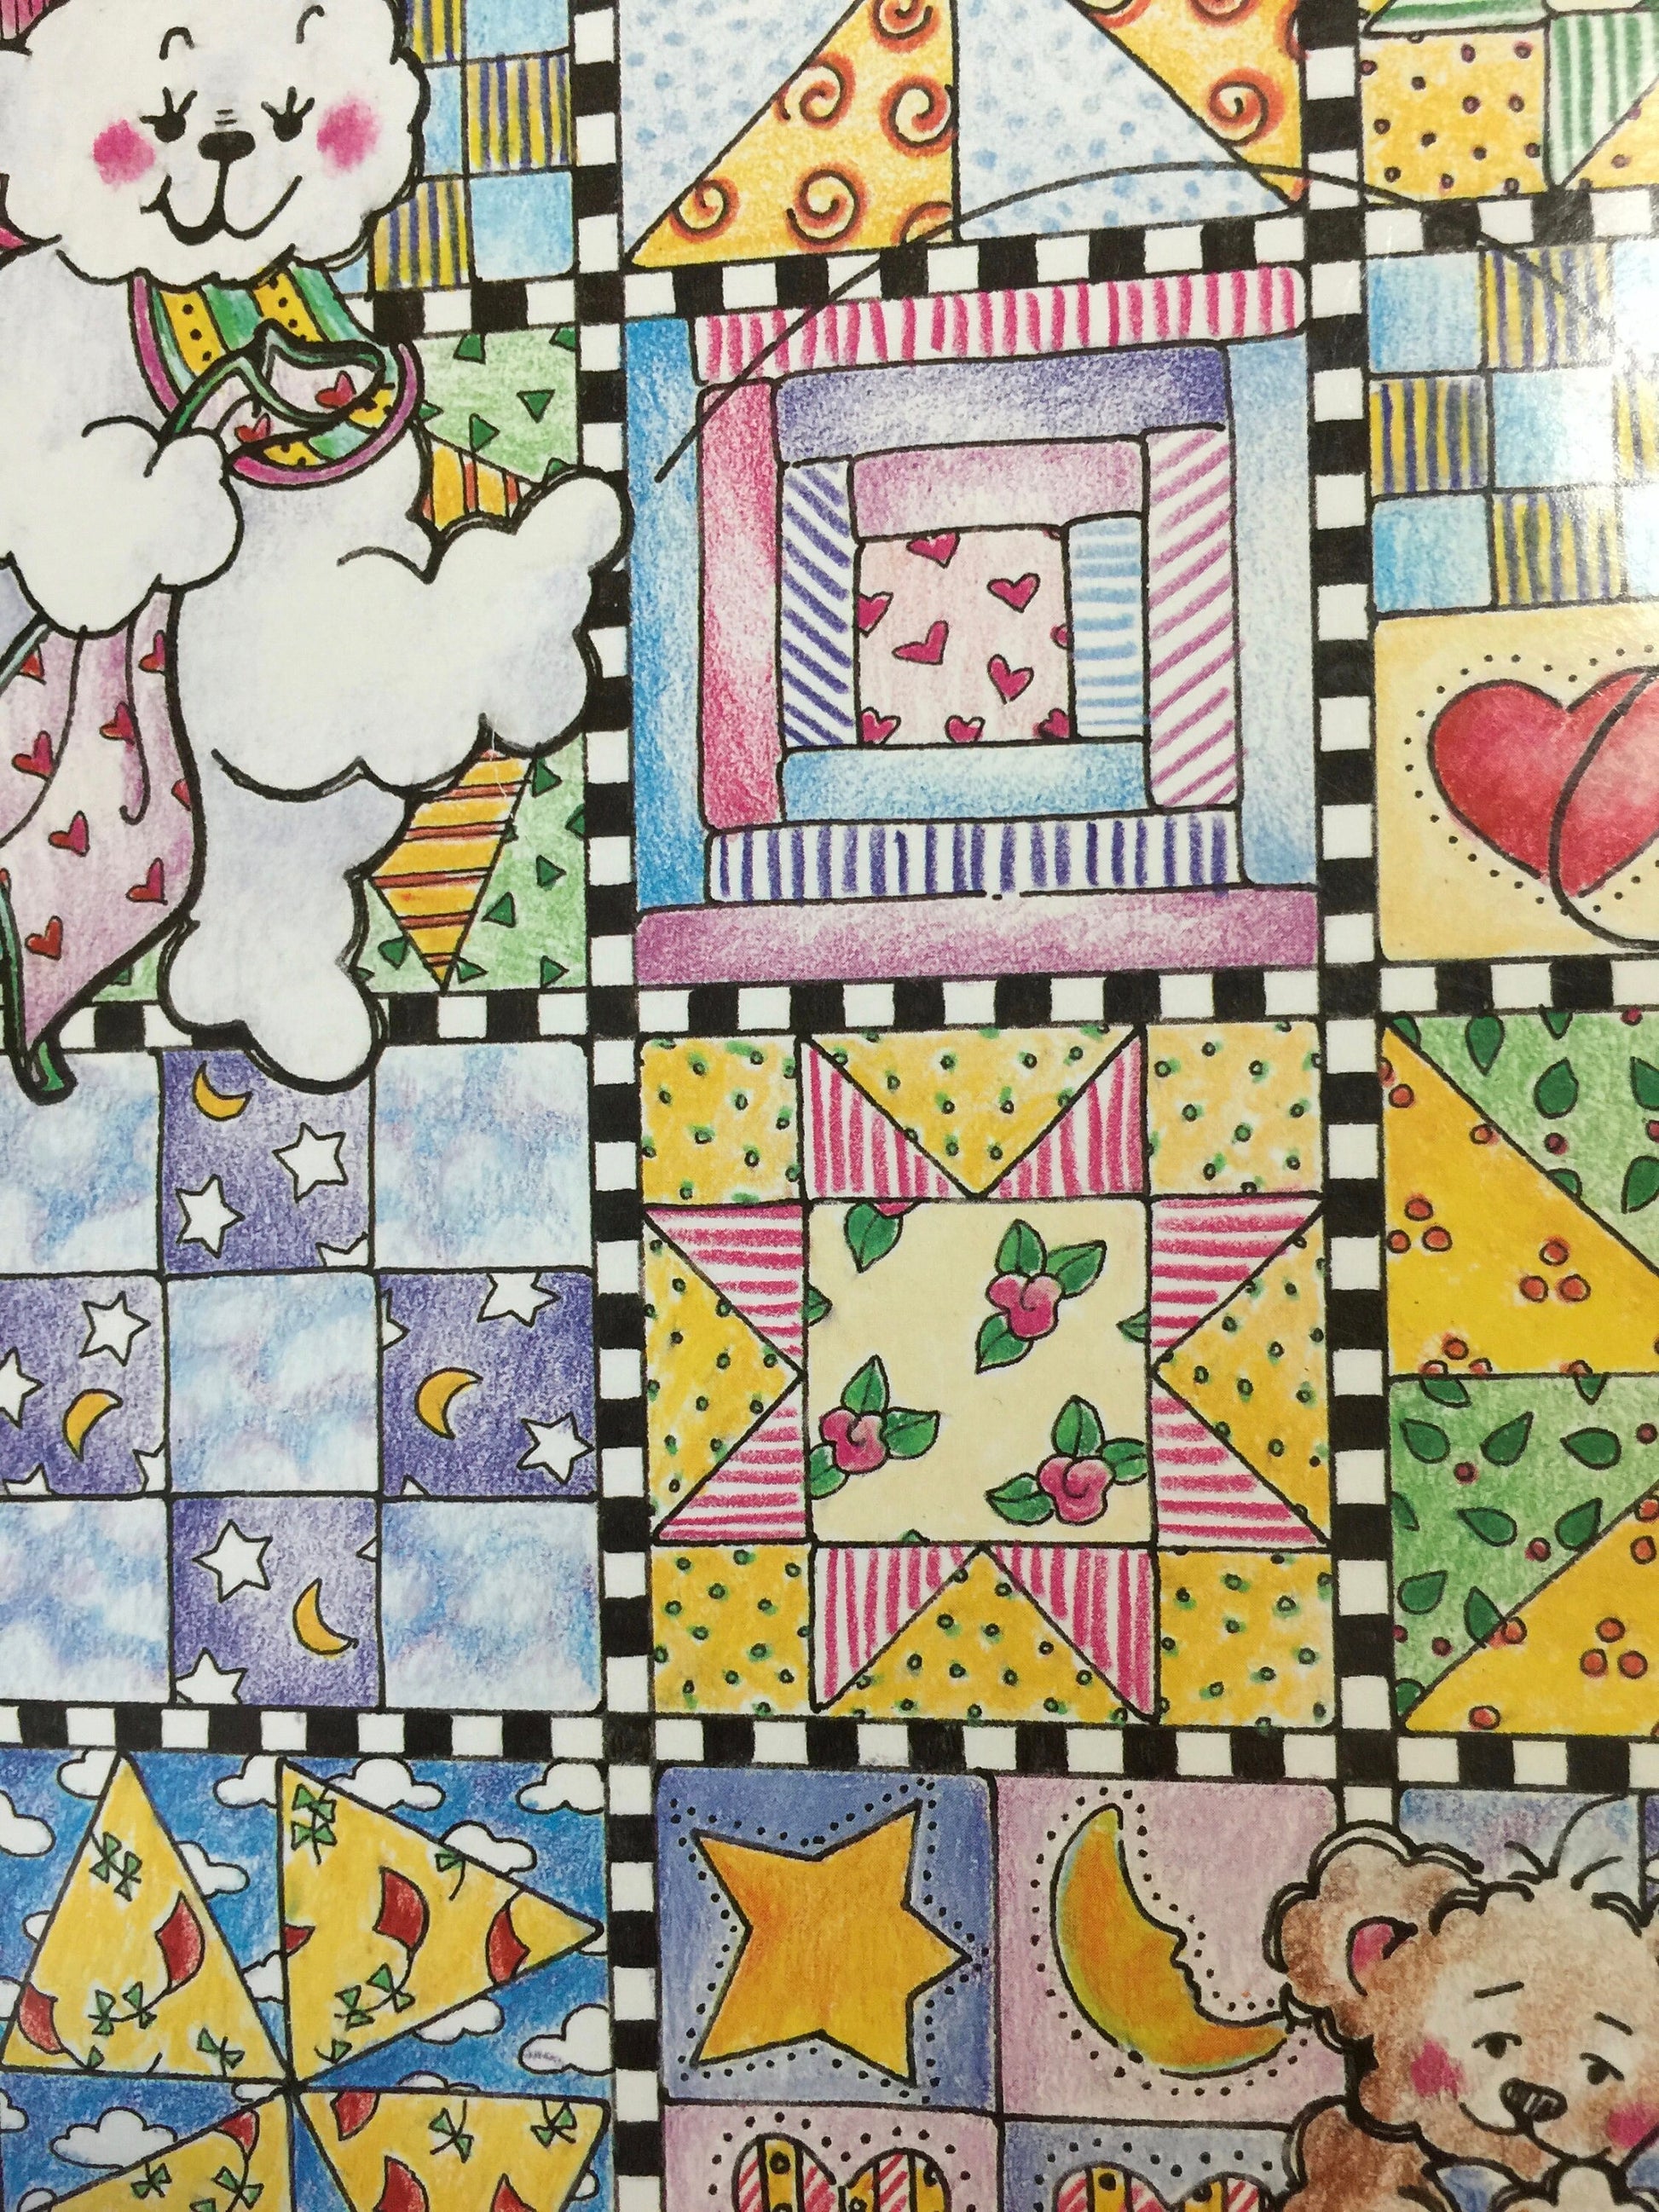 Vintage 1996 P S I Love YouTwo!, A Sequel, Nancy J. Smith, and Lynda S Milligan, Quilt, pattern book